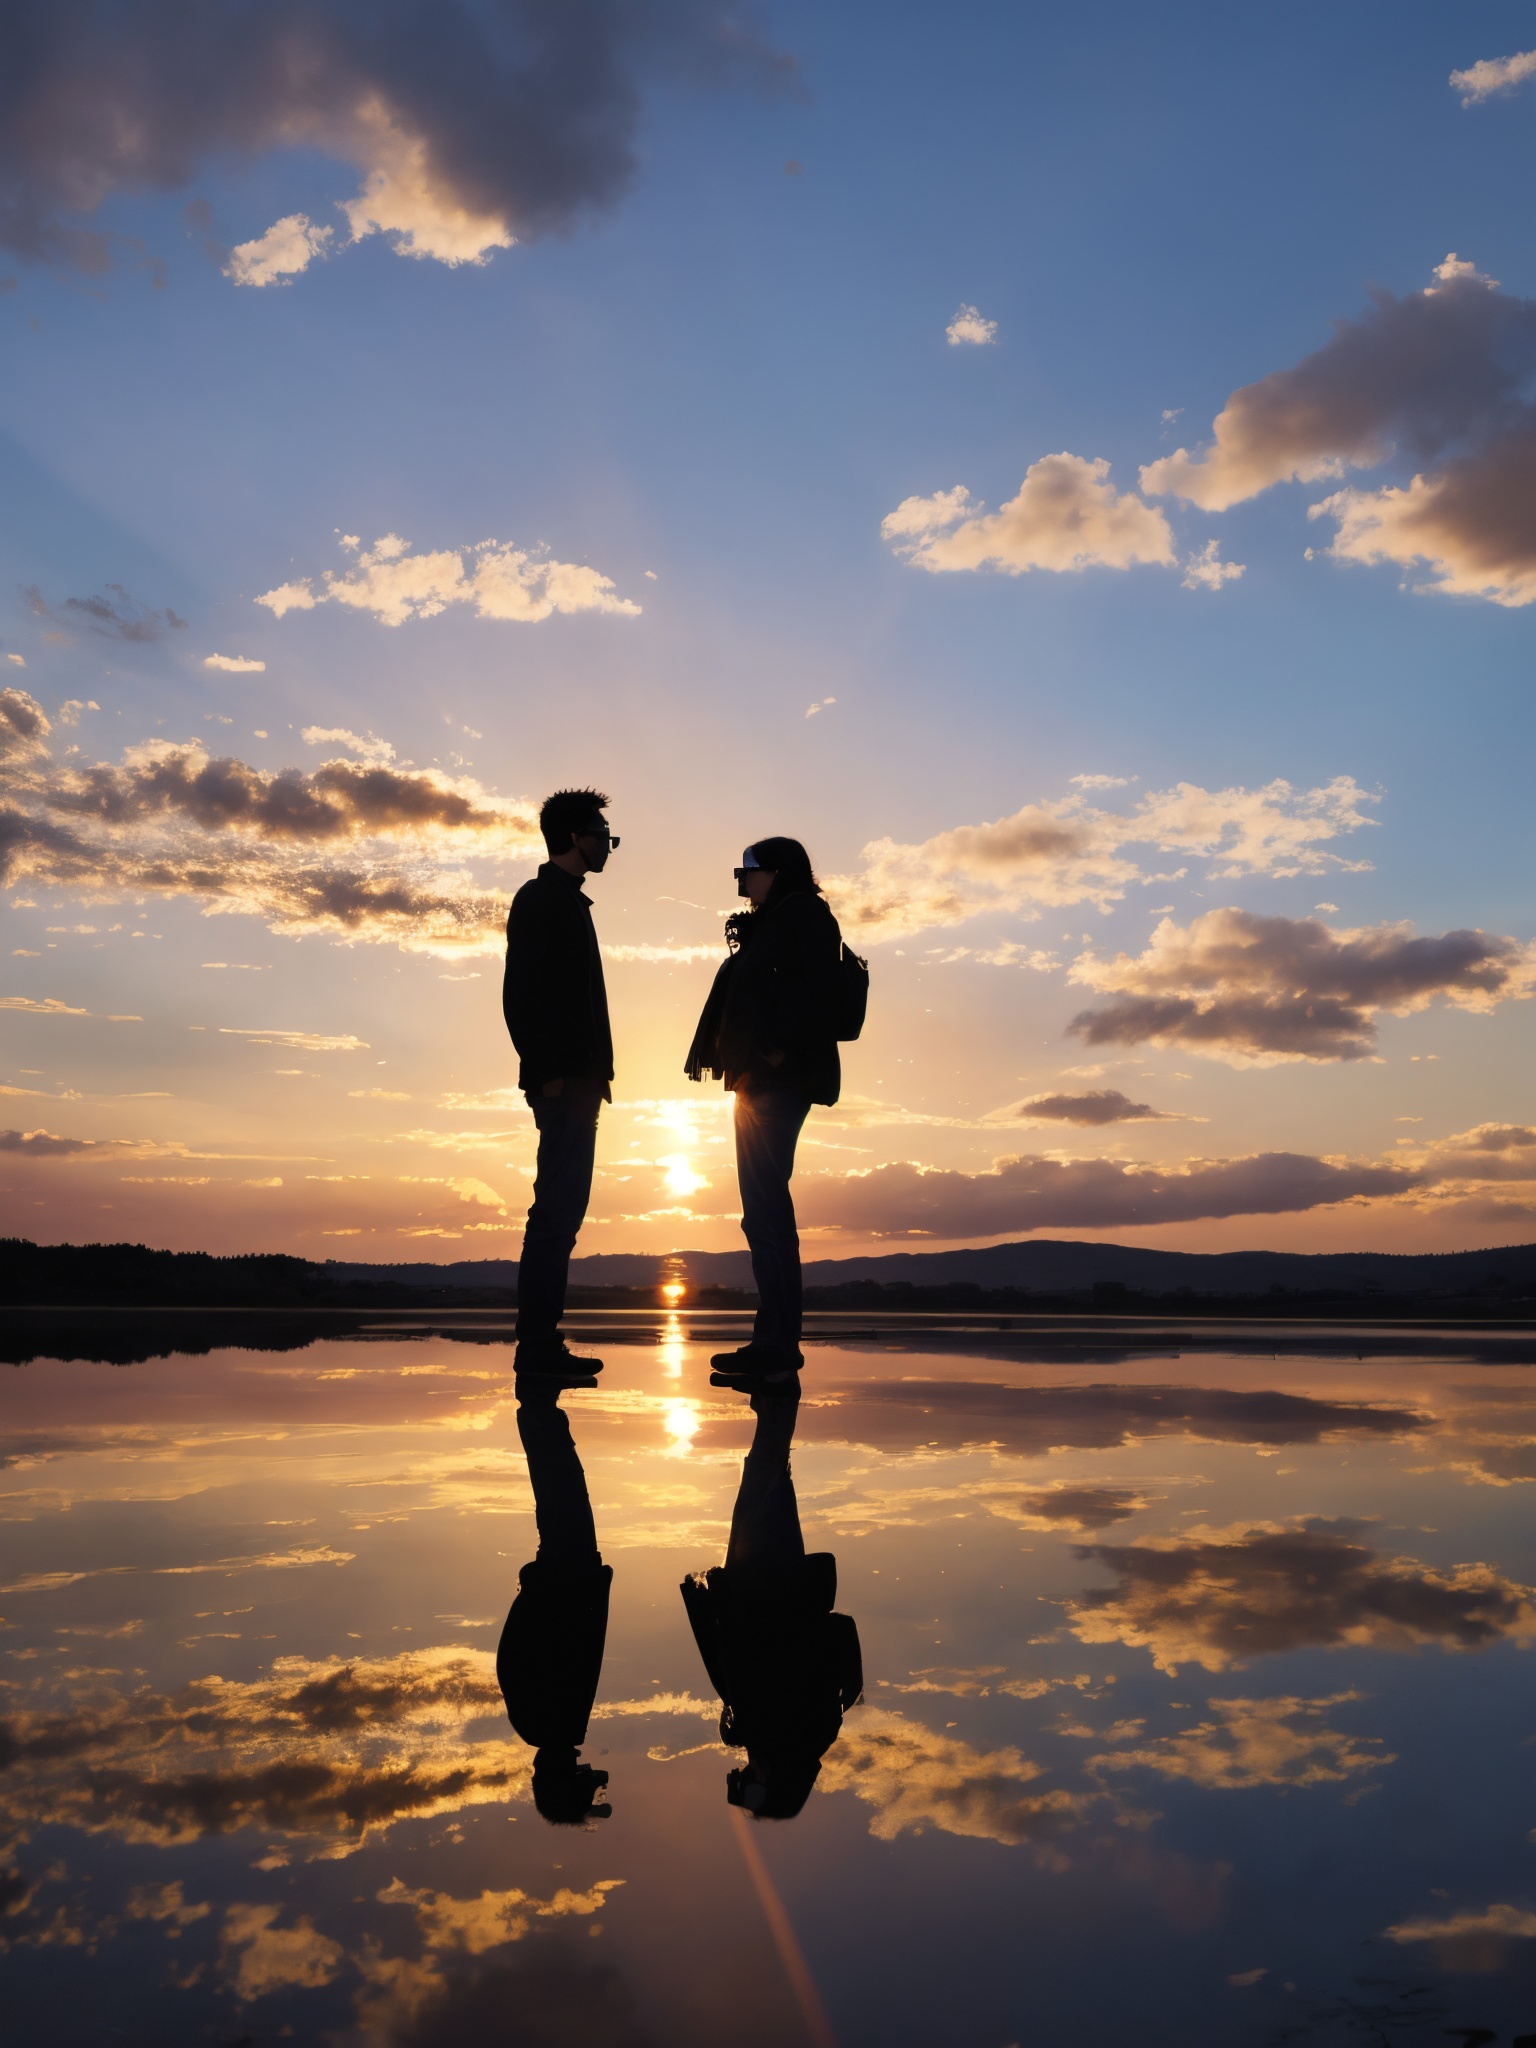 F-B-C, reflection, silhouette, two people reflecting into glasses, rayban glasses, sunset, clouds